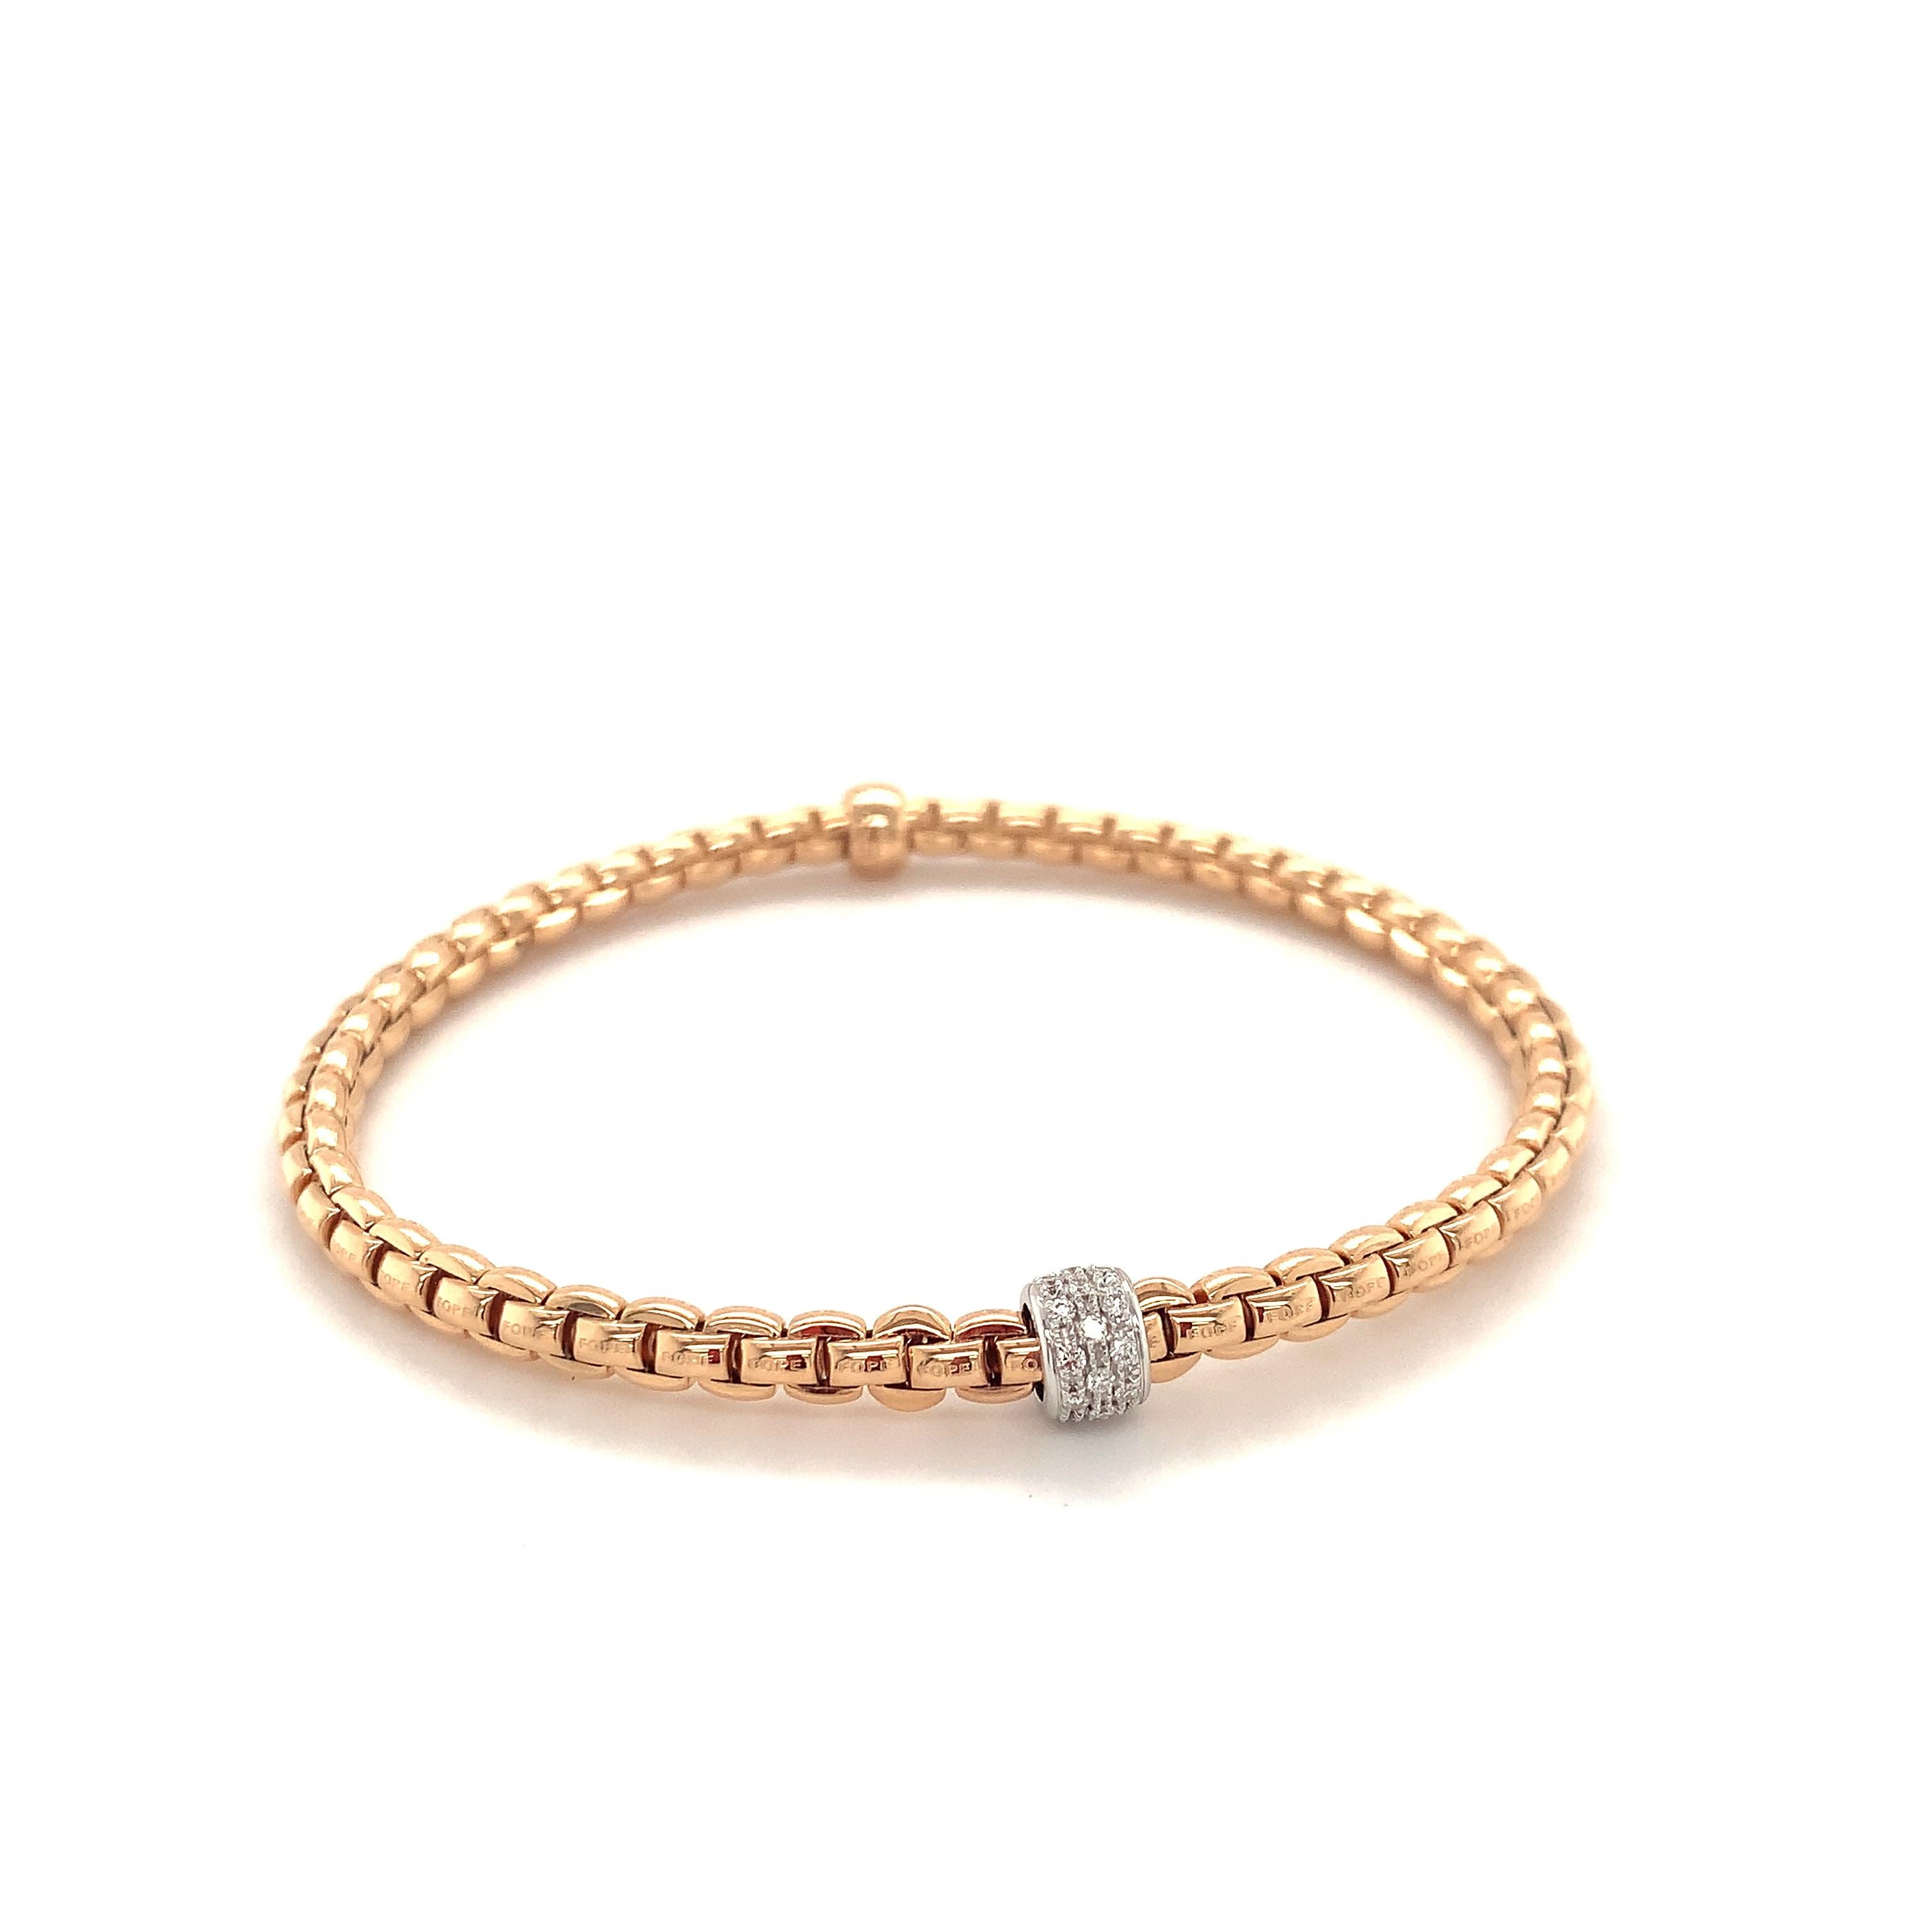 Flexible bracelet entirely made of 18 karats rose gold with white gold rondel (0.19 carats of diamonds). This mesh chain hides dozens of tiny 18 carat gold springs which make the bracelets and rings smooth and flexible. The bracelet diameter can be